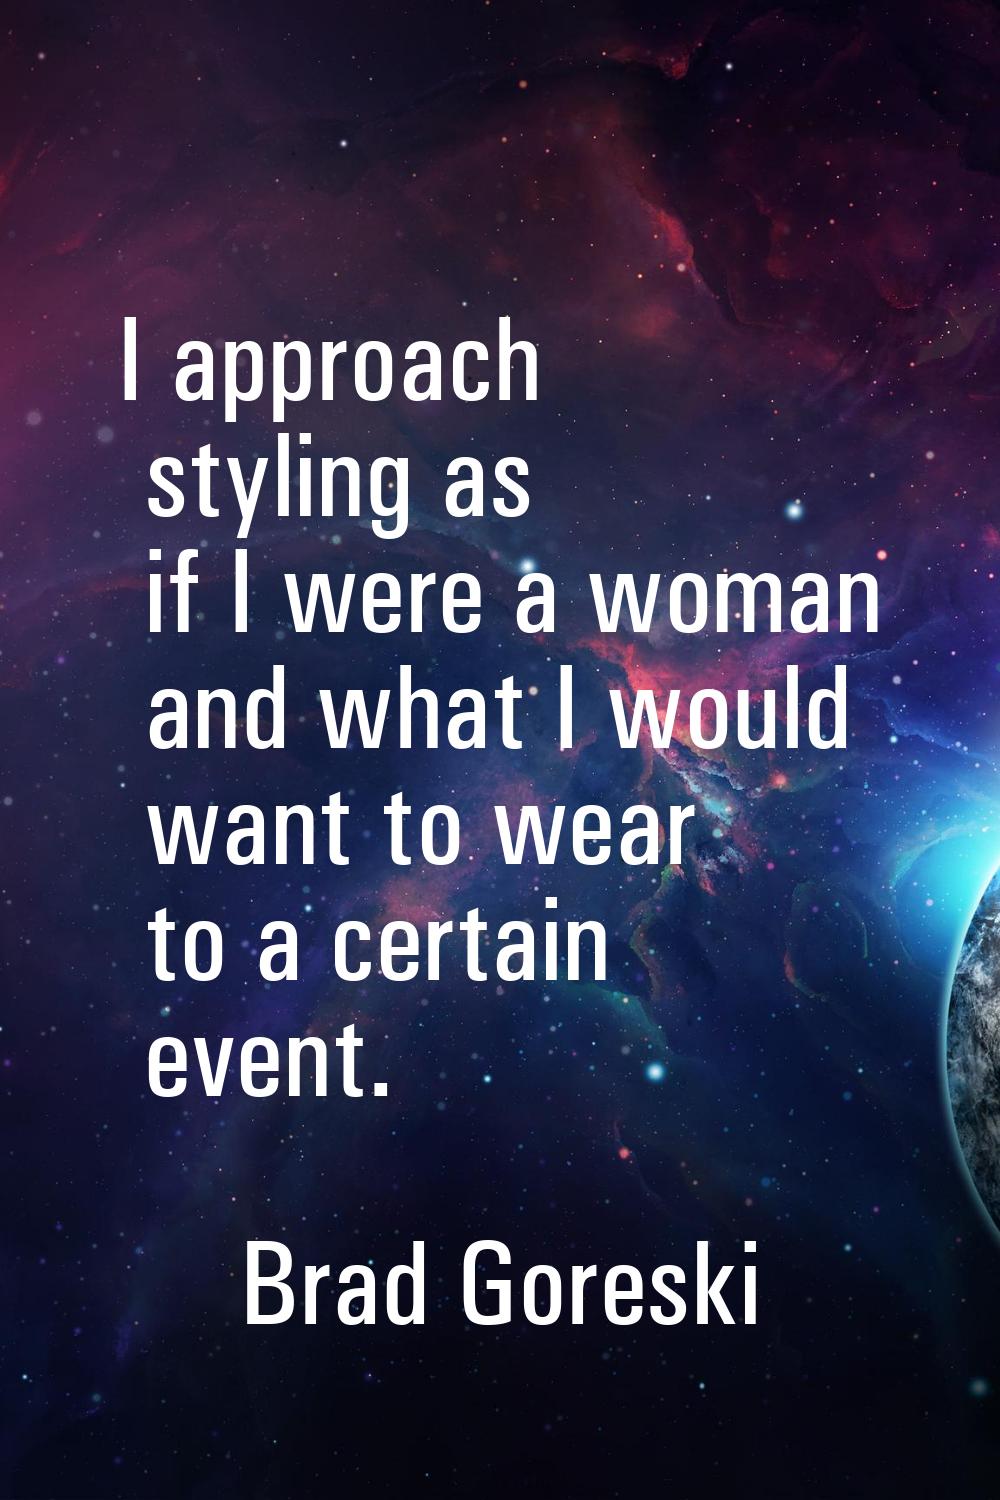 I approach styling as if I were a woman and what I would want to wear to a certain event.